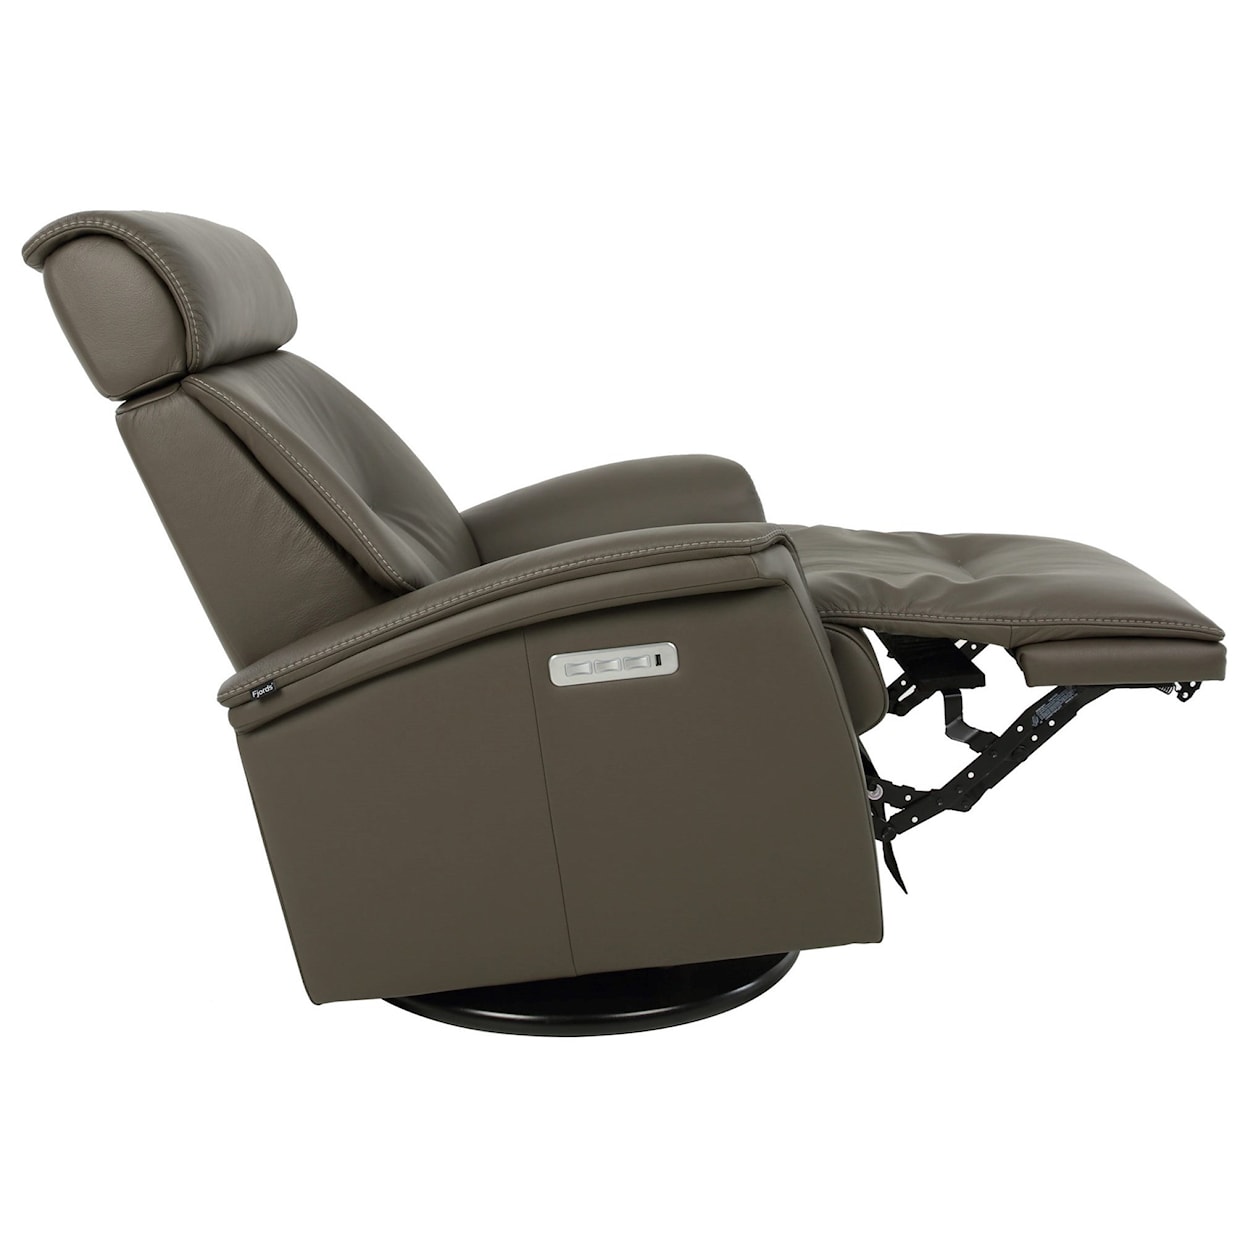 Fjords by Hjellegjerde Relax Collection Rome Large Power Recliner